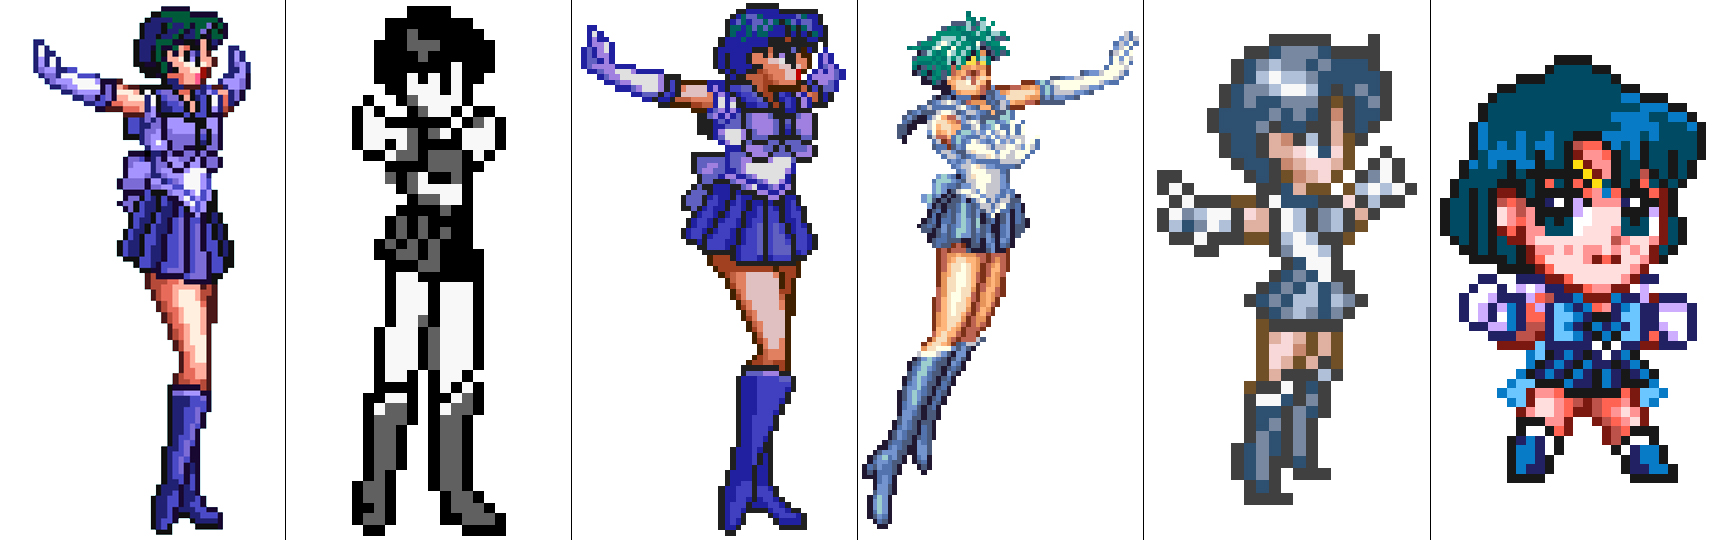 The Sailor Scouts Don’t Look Half Bad As Retro Game Sprites